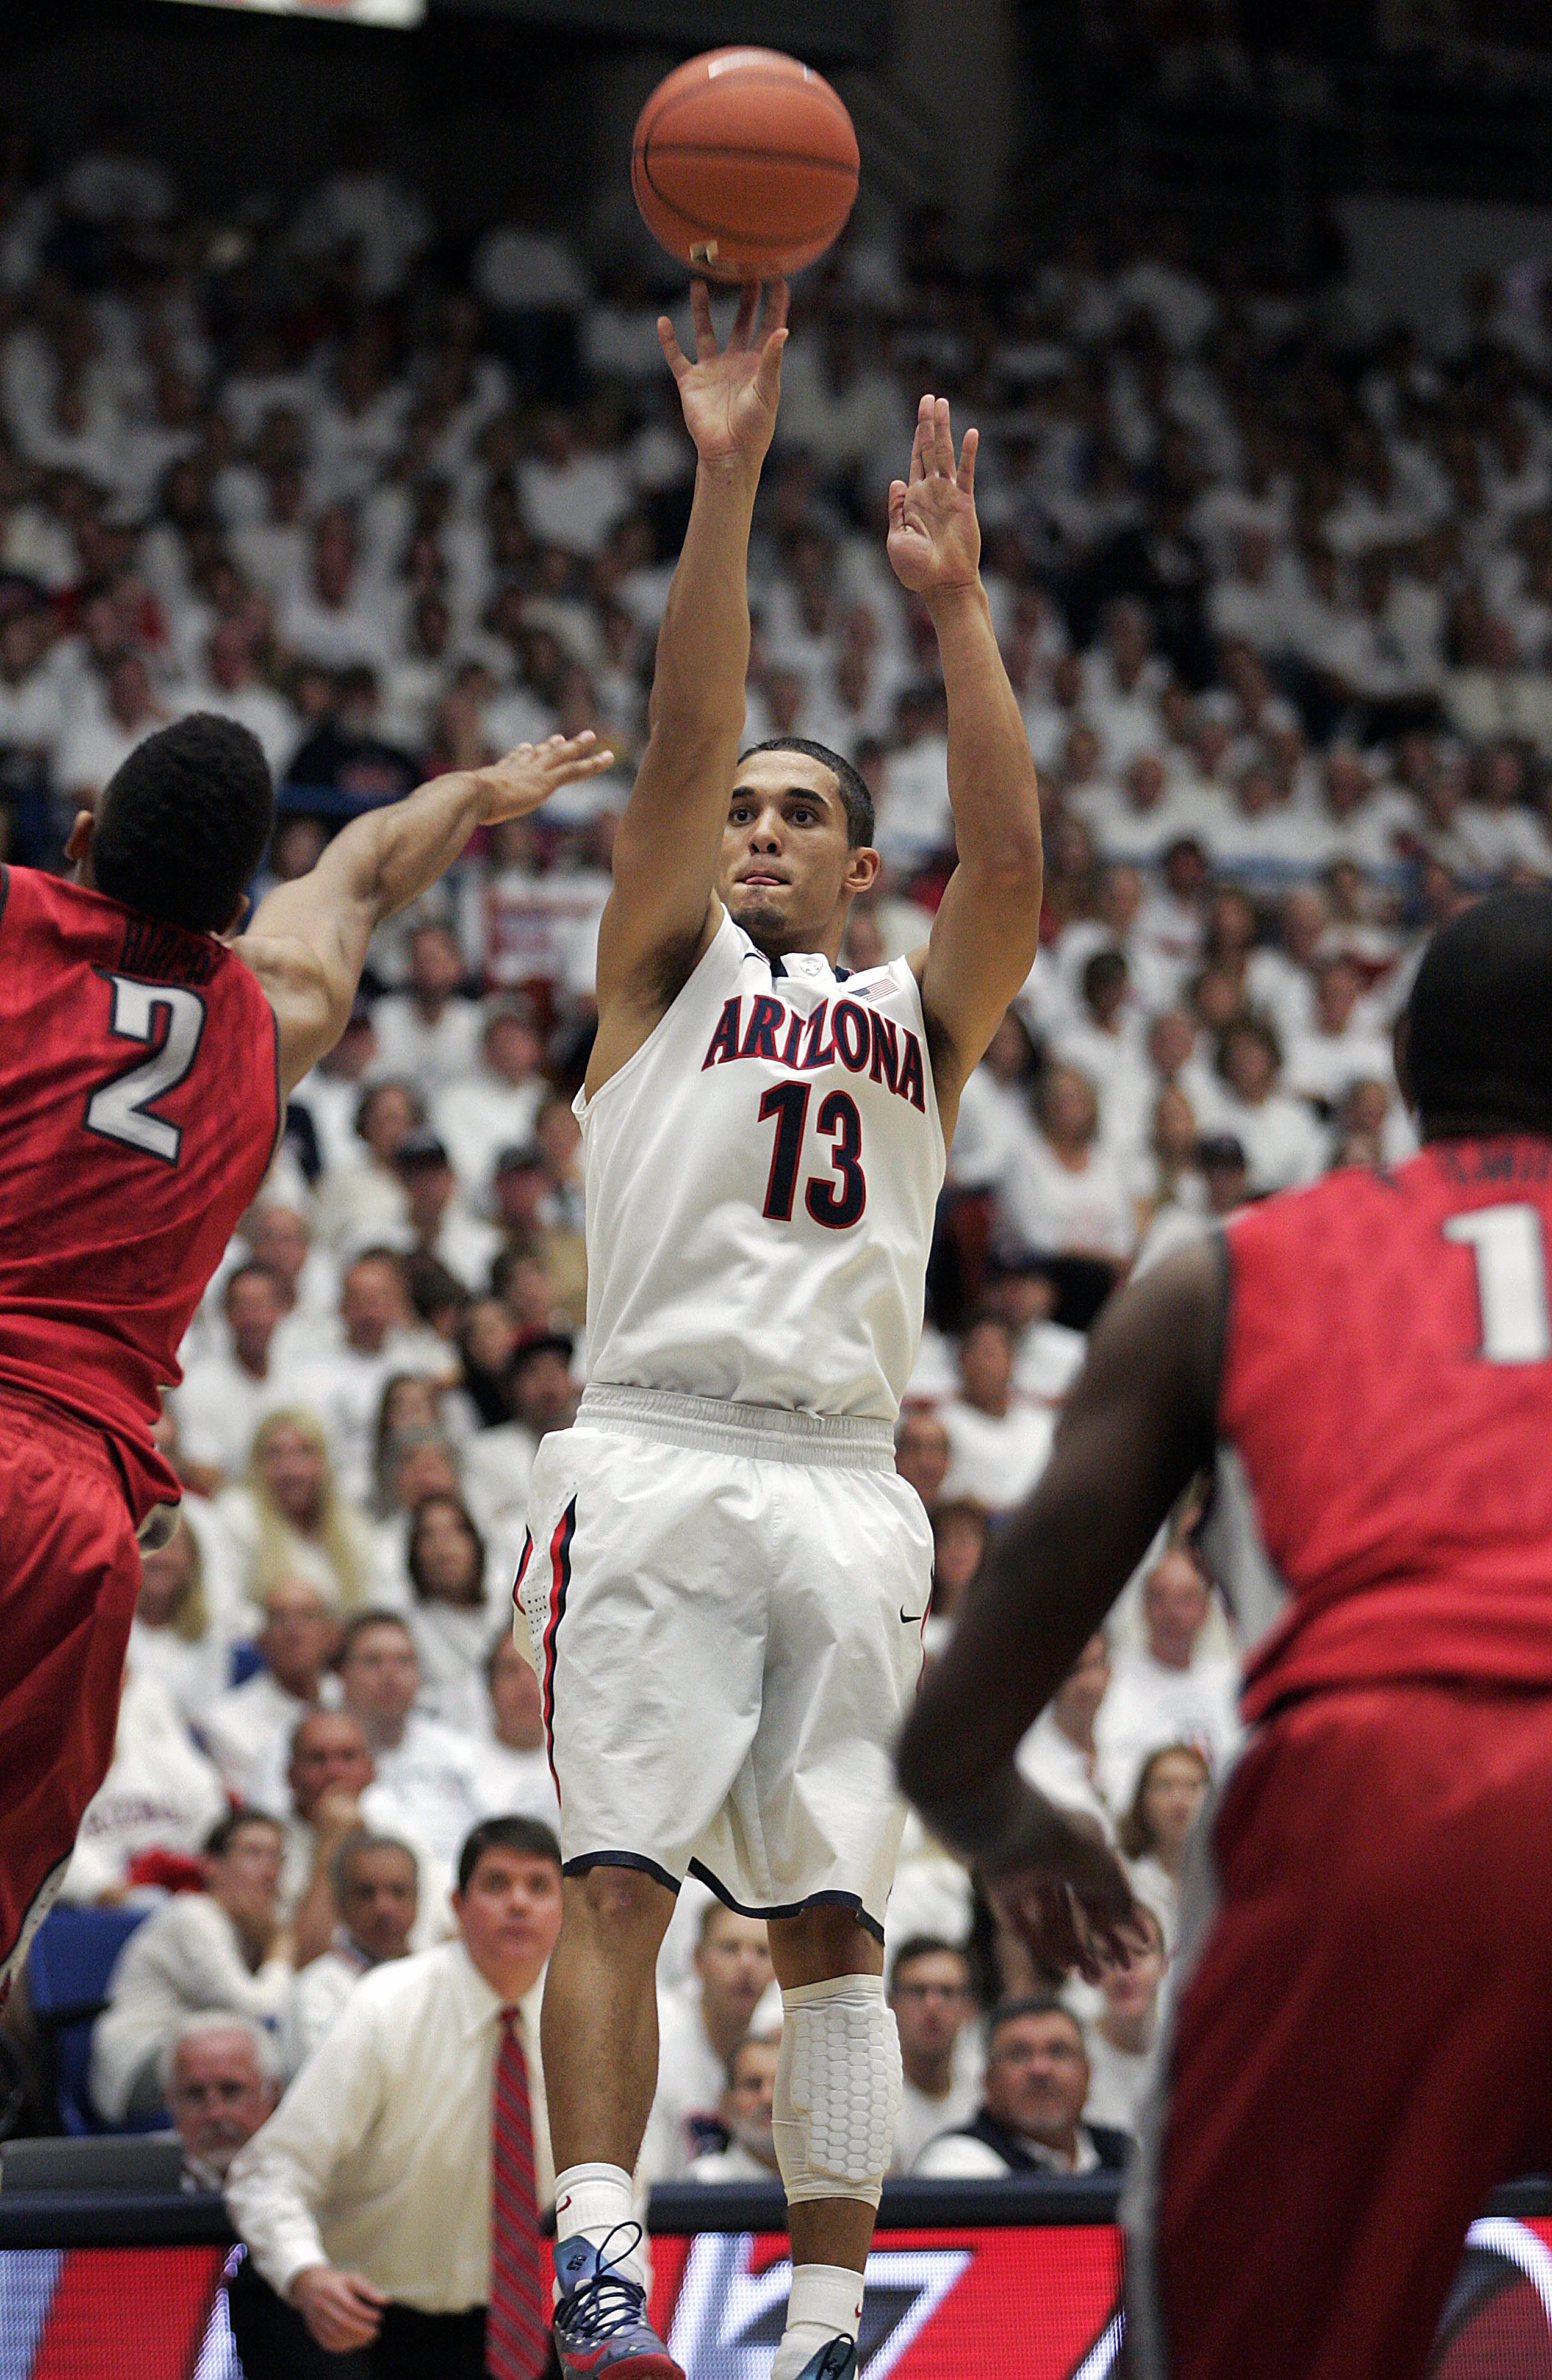 Arizona moves to No. 1 in AP poll for first time since 2003; North